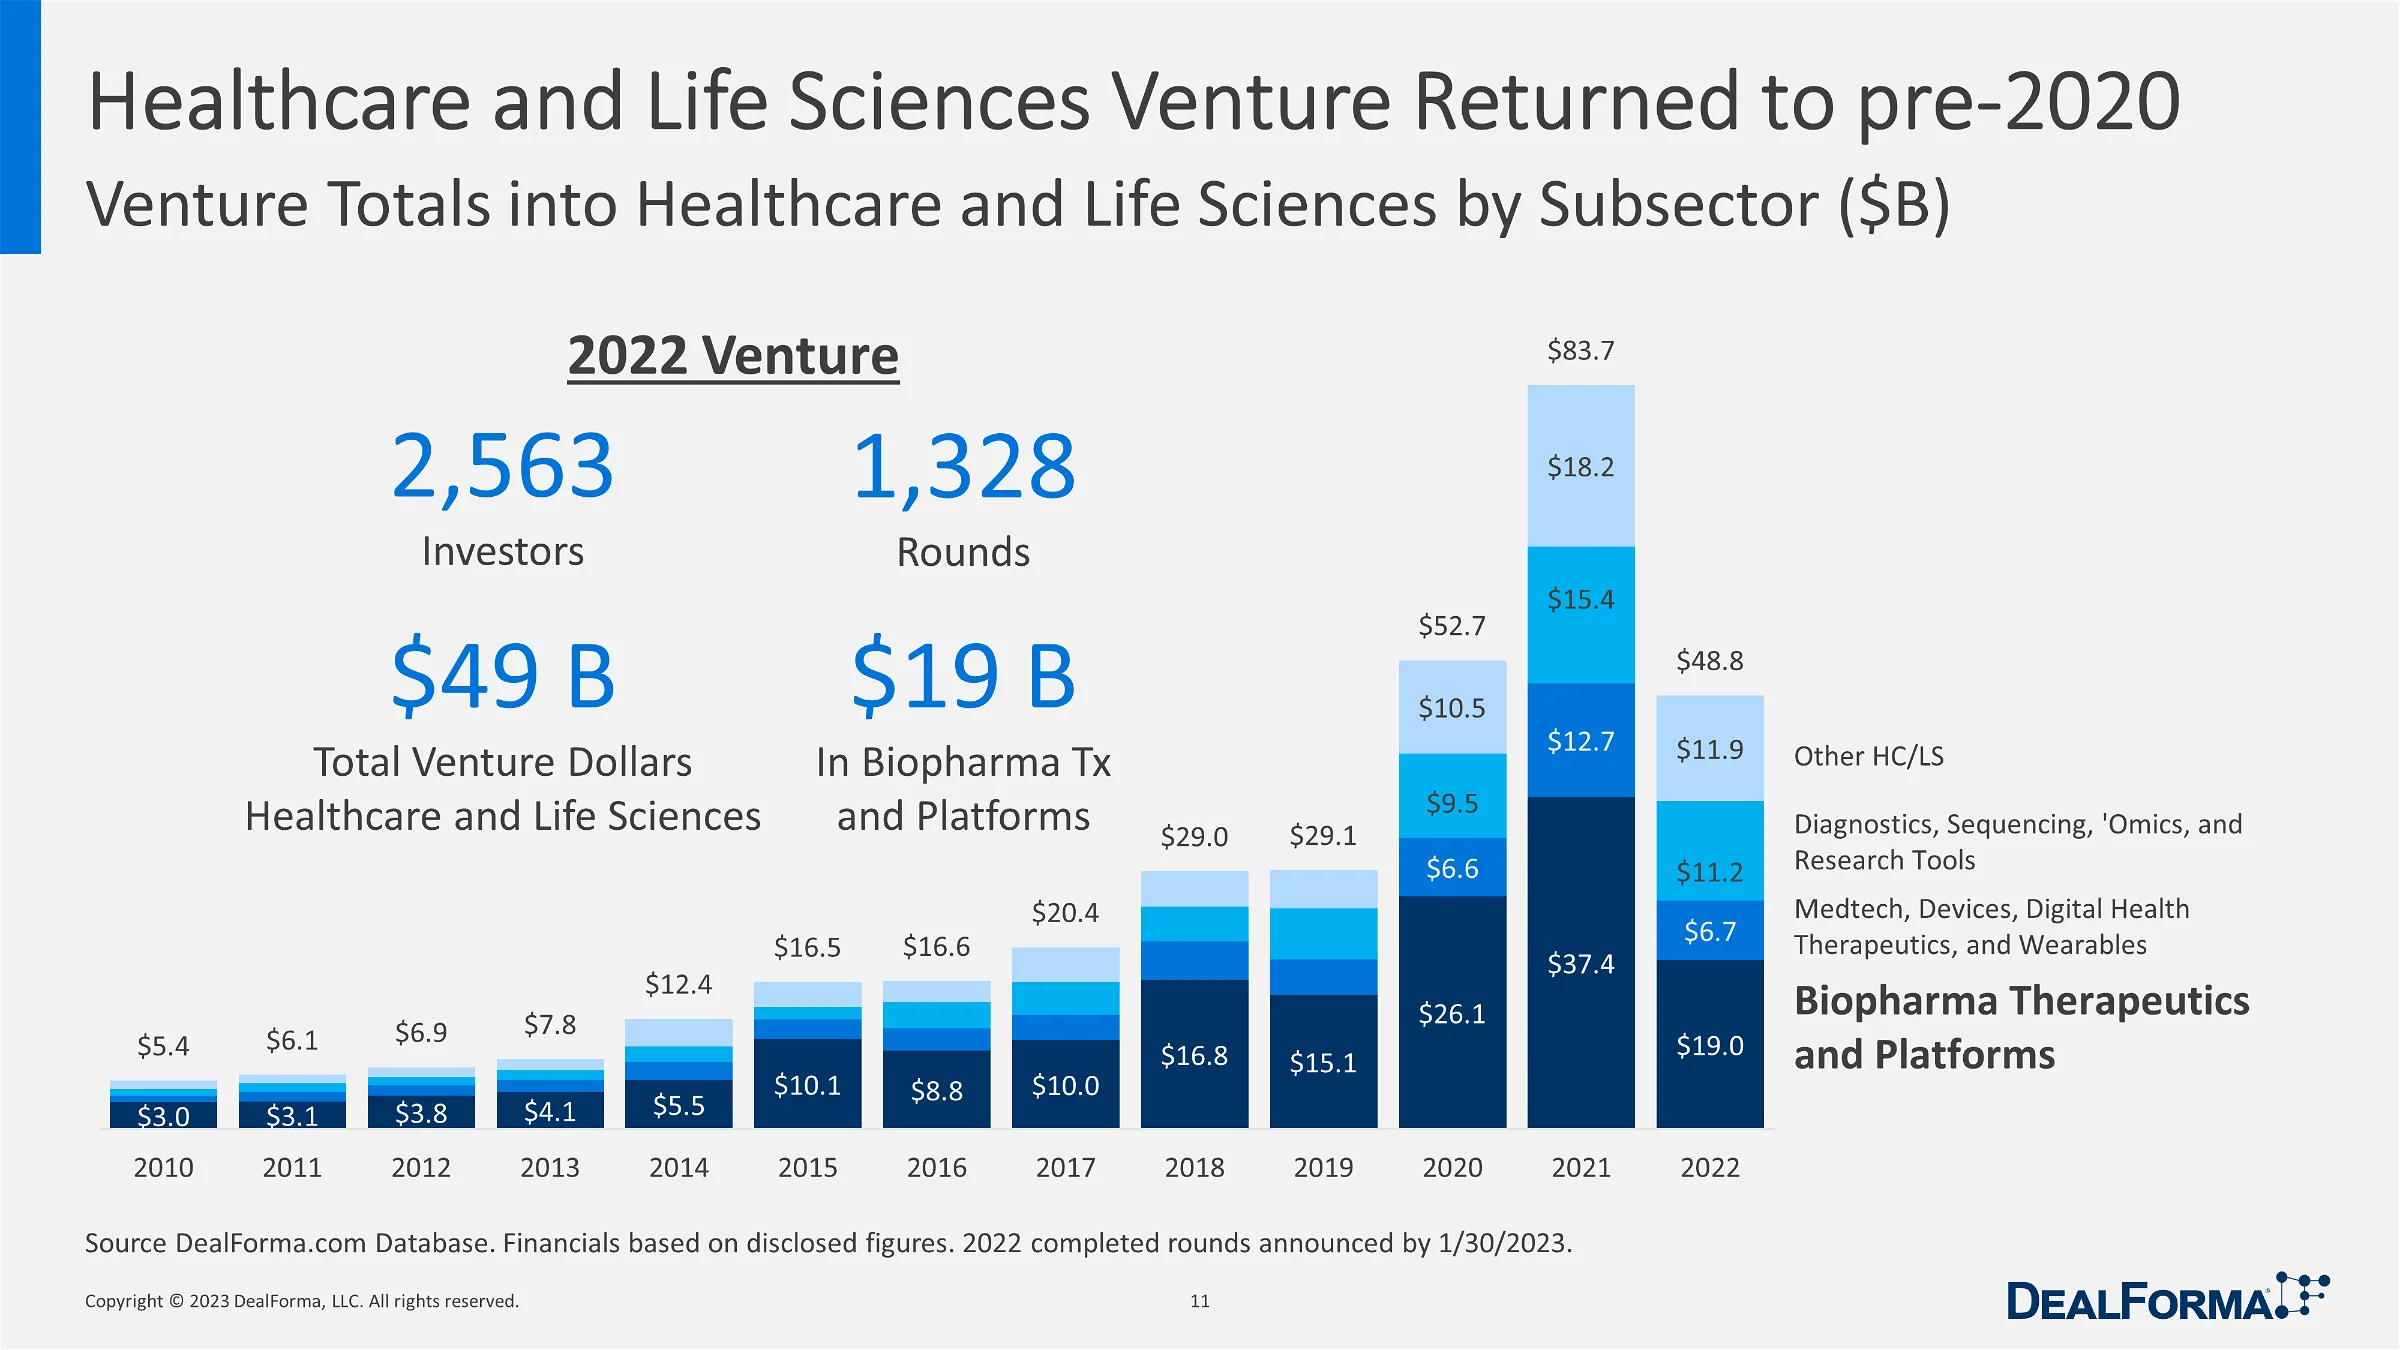 Healthcare and Life Sciences Venture Returned to pre 2020